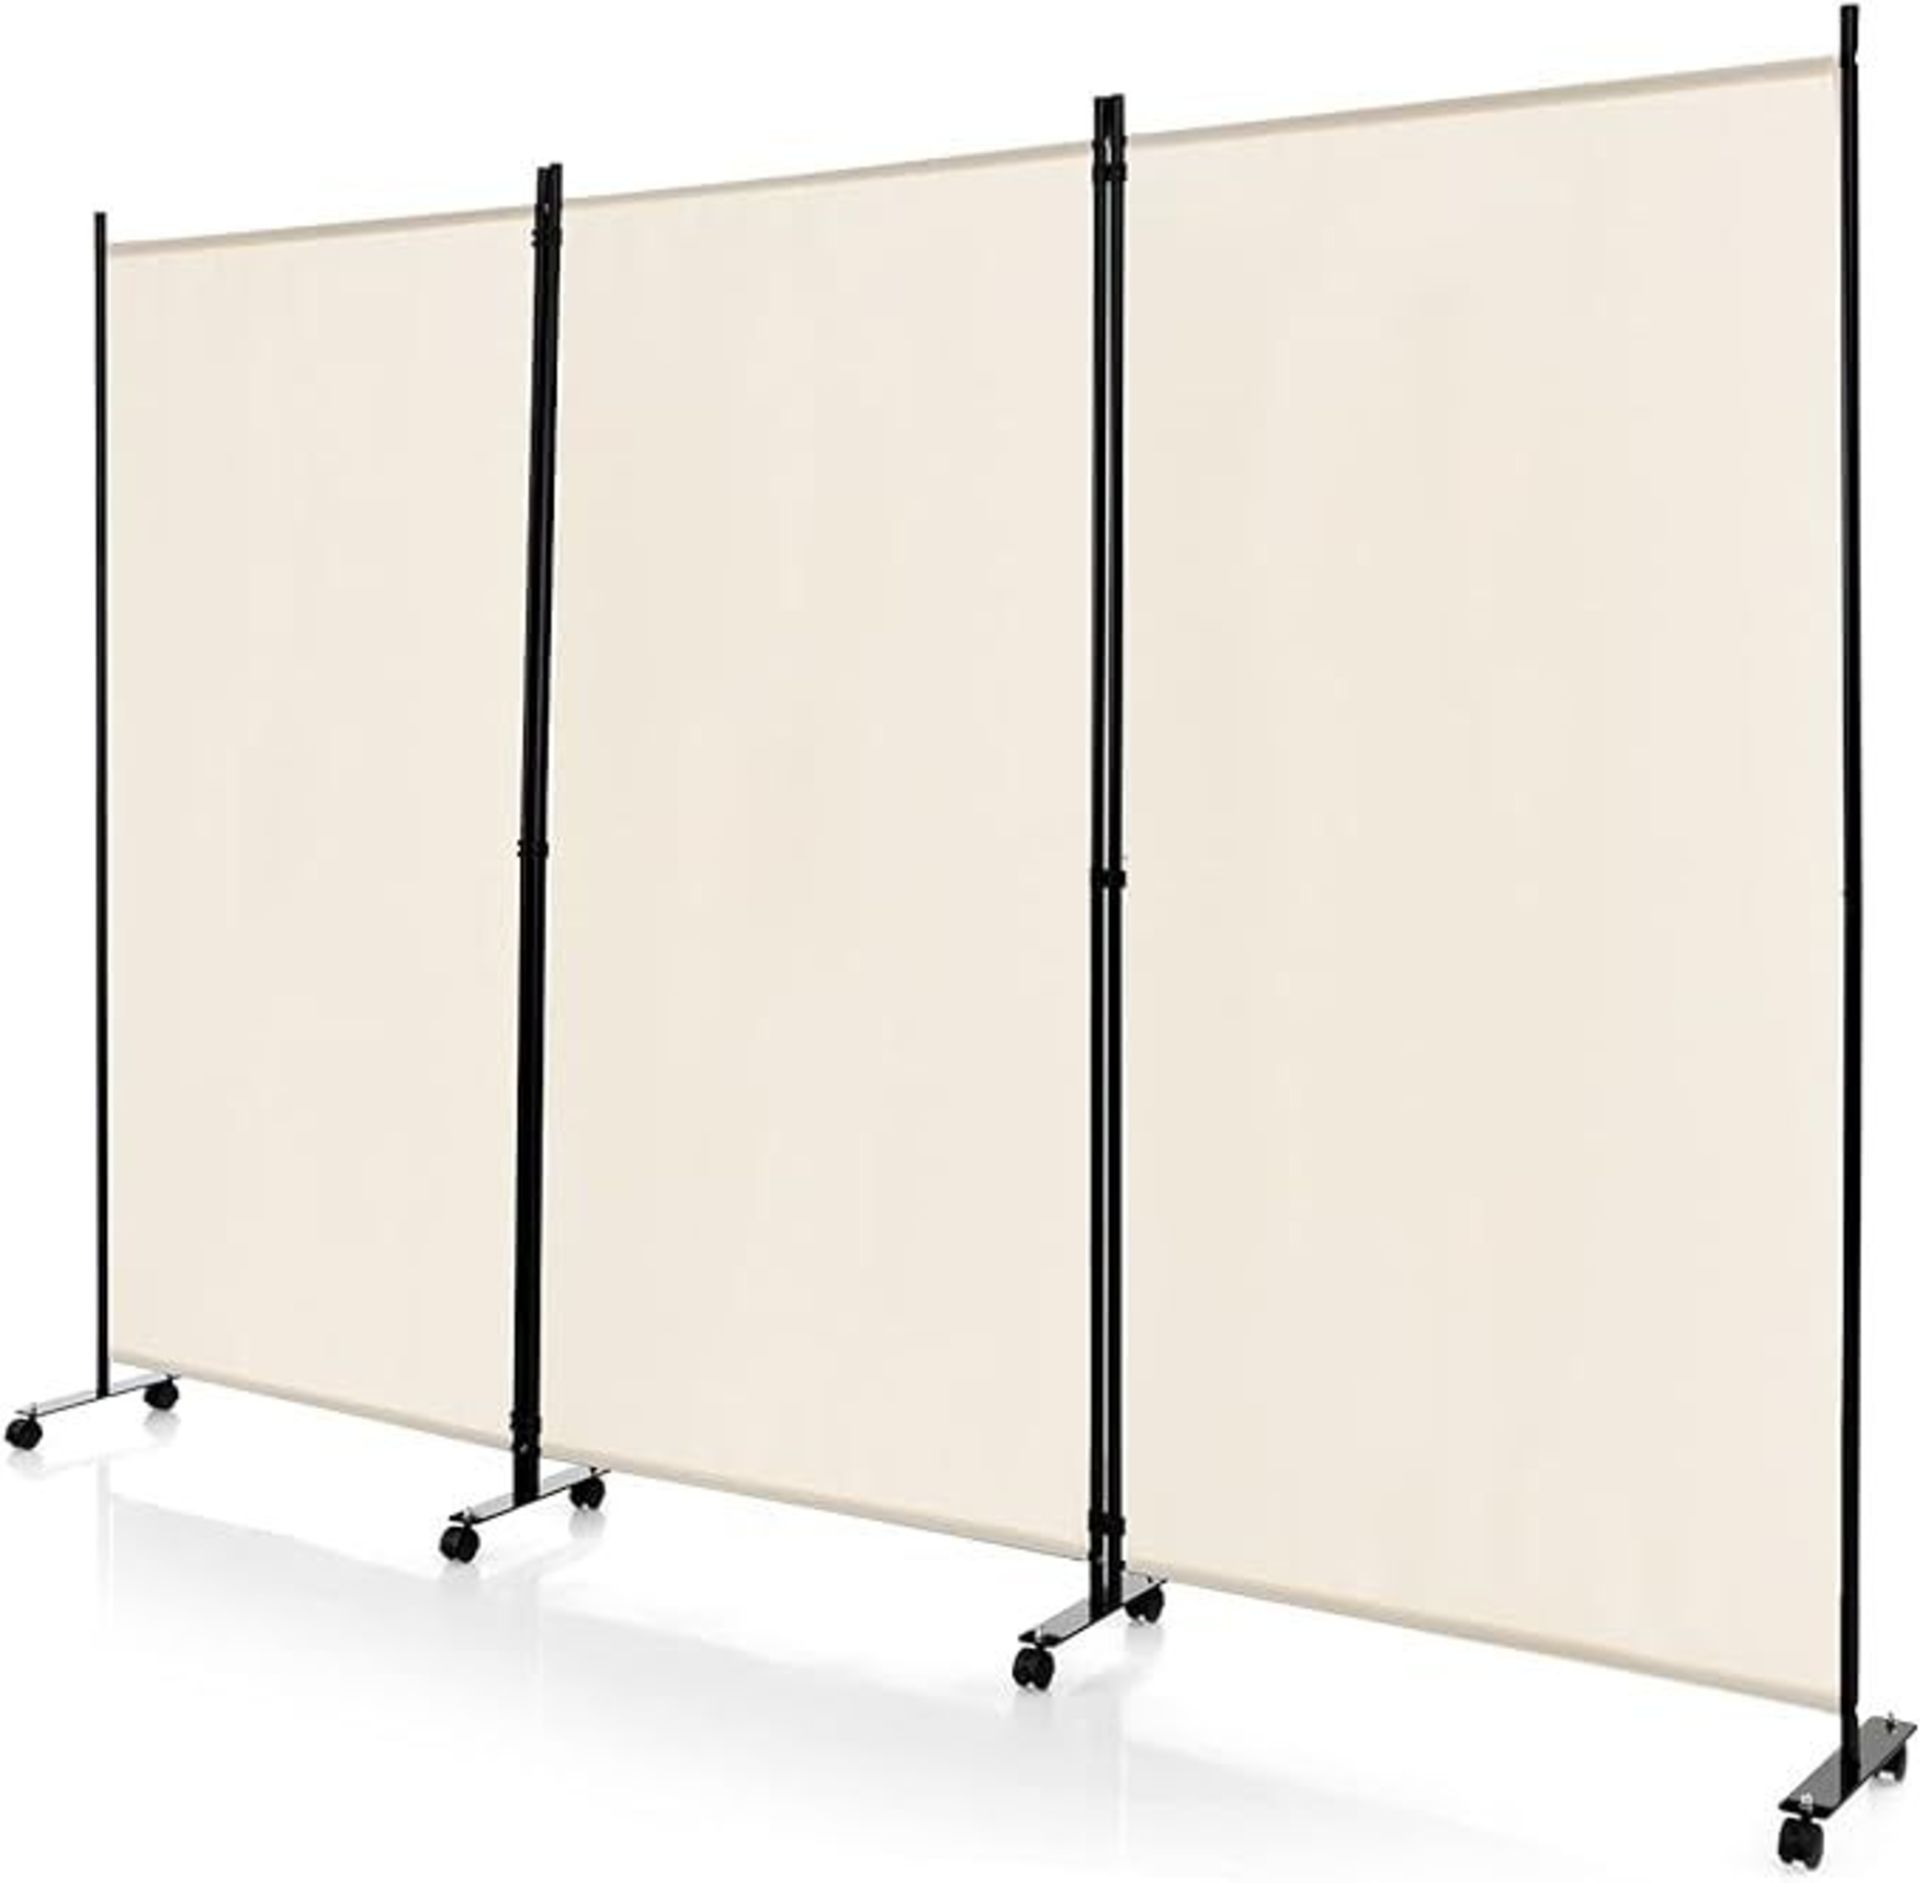 CASART Folding Room Dividers, 3/4 Panels Movable Protective Privacy Screens with Lockable Wheels,